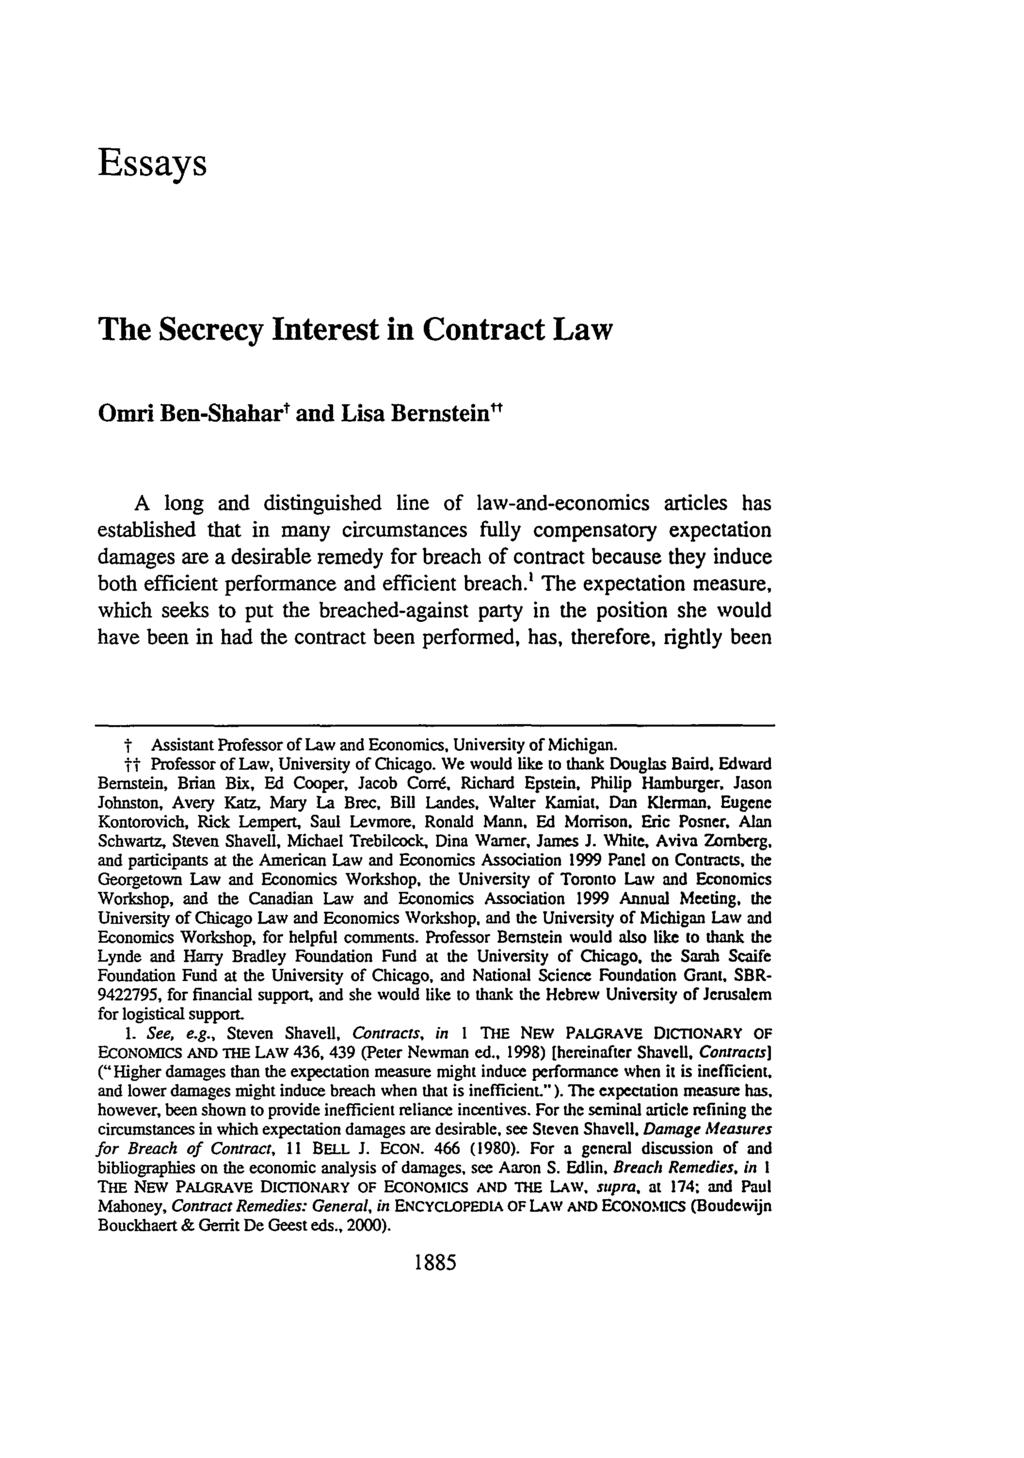 Essays The Secrecy Interest in Contract Law Omri Ben-Shahare and Lisa Bernstein" A long and distinguished line of law-and-economics articles has established that in many circumstances fully